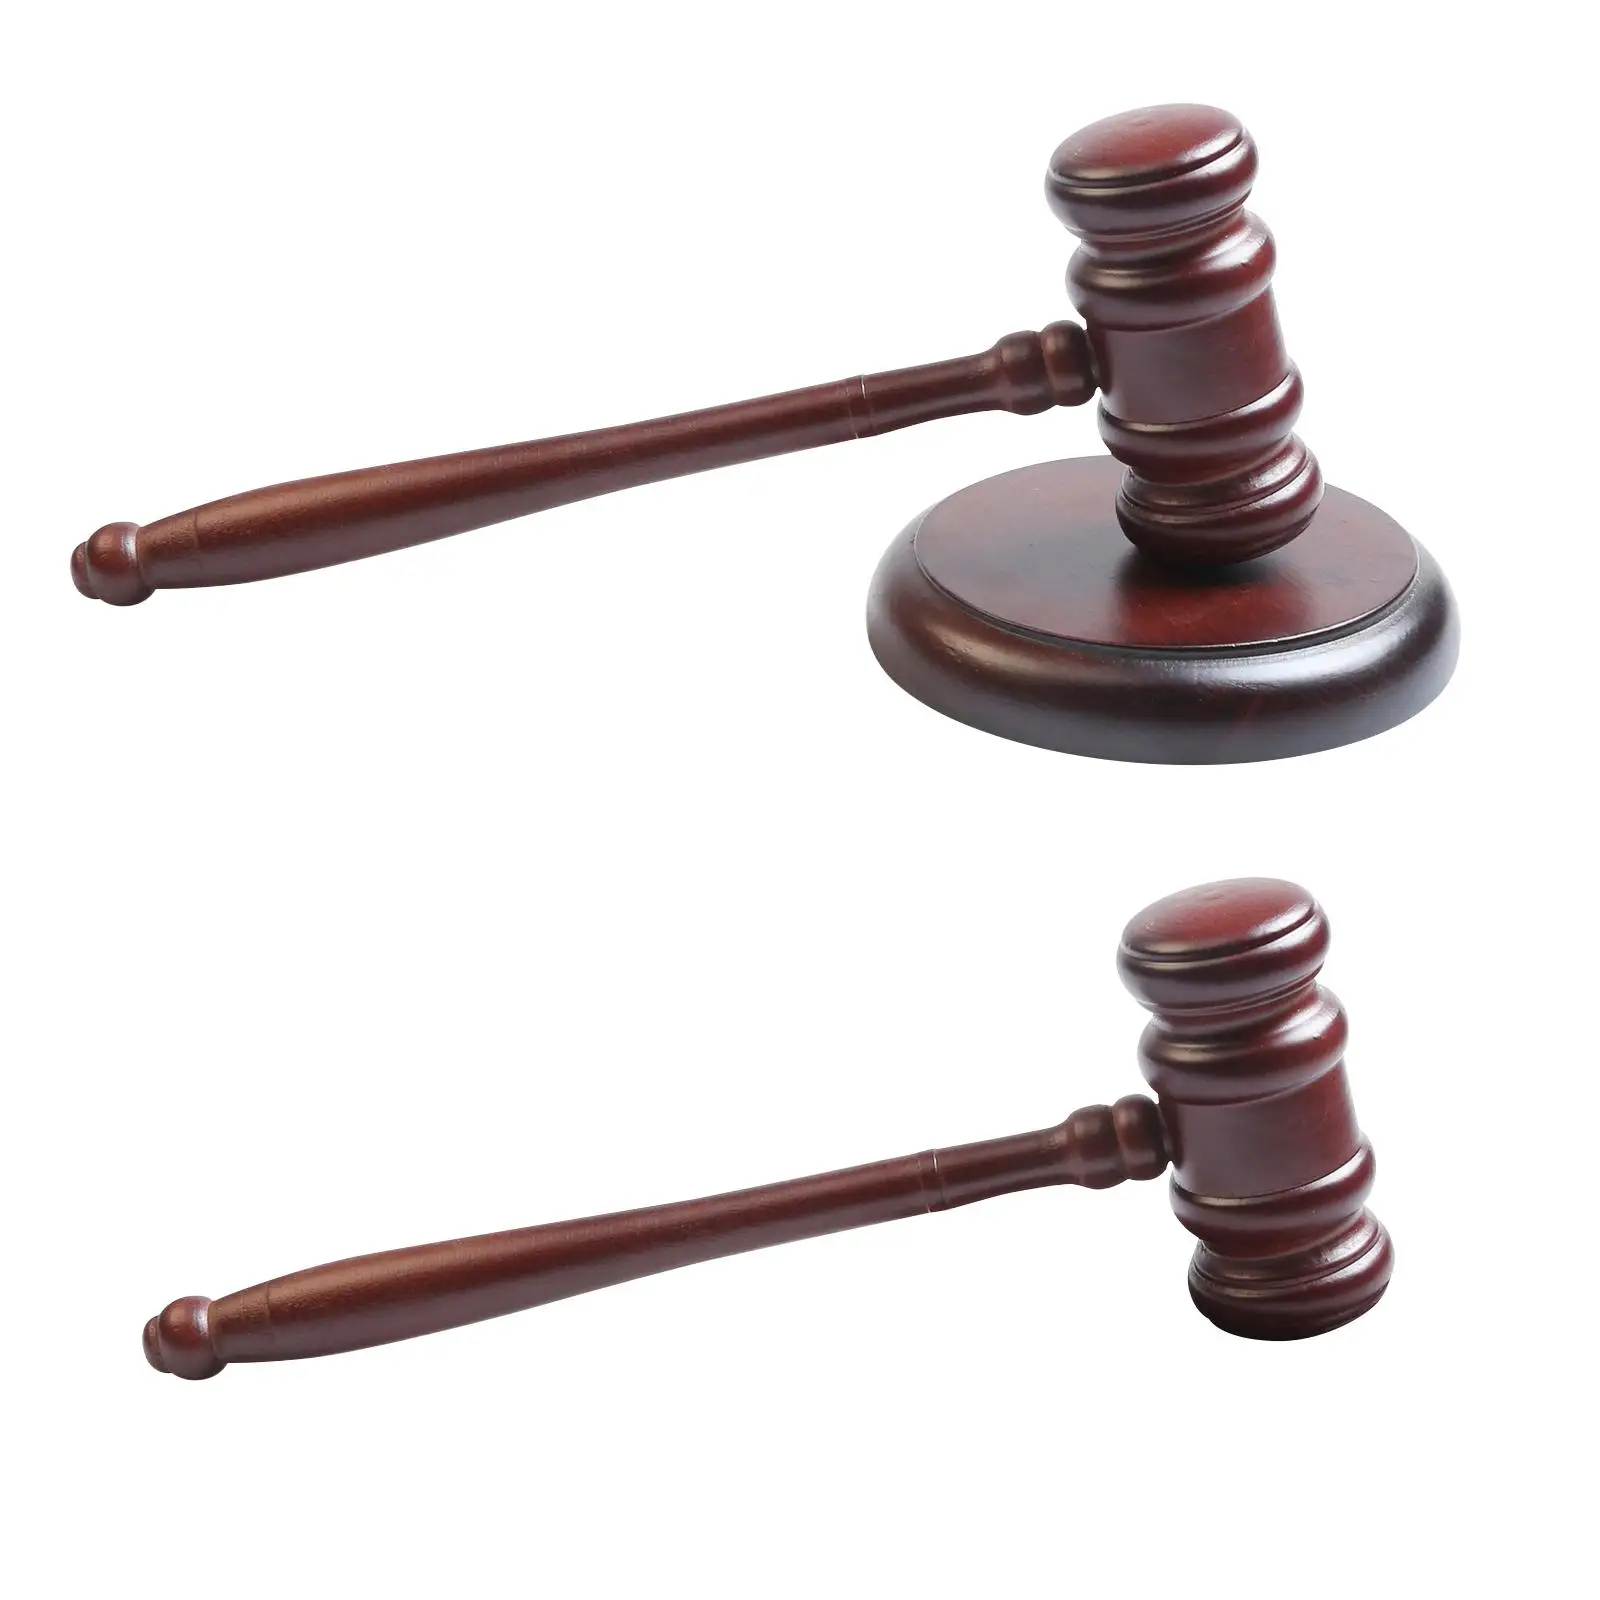 Wood Gavel Prop Costume Toy Wooden Gavel Cosplay Props for Auction Court Judge Justice Lawyer Student